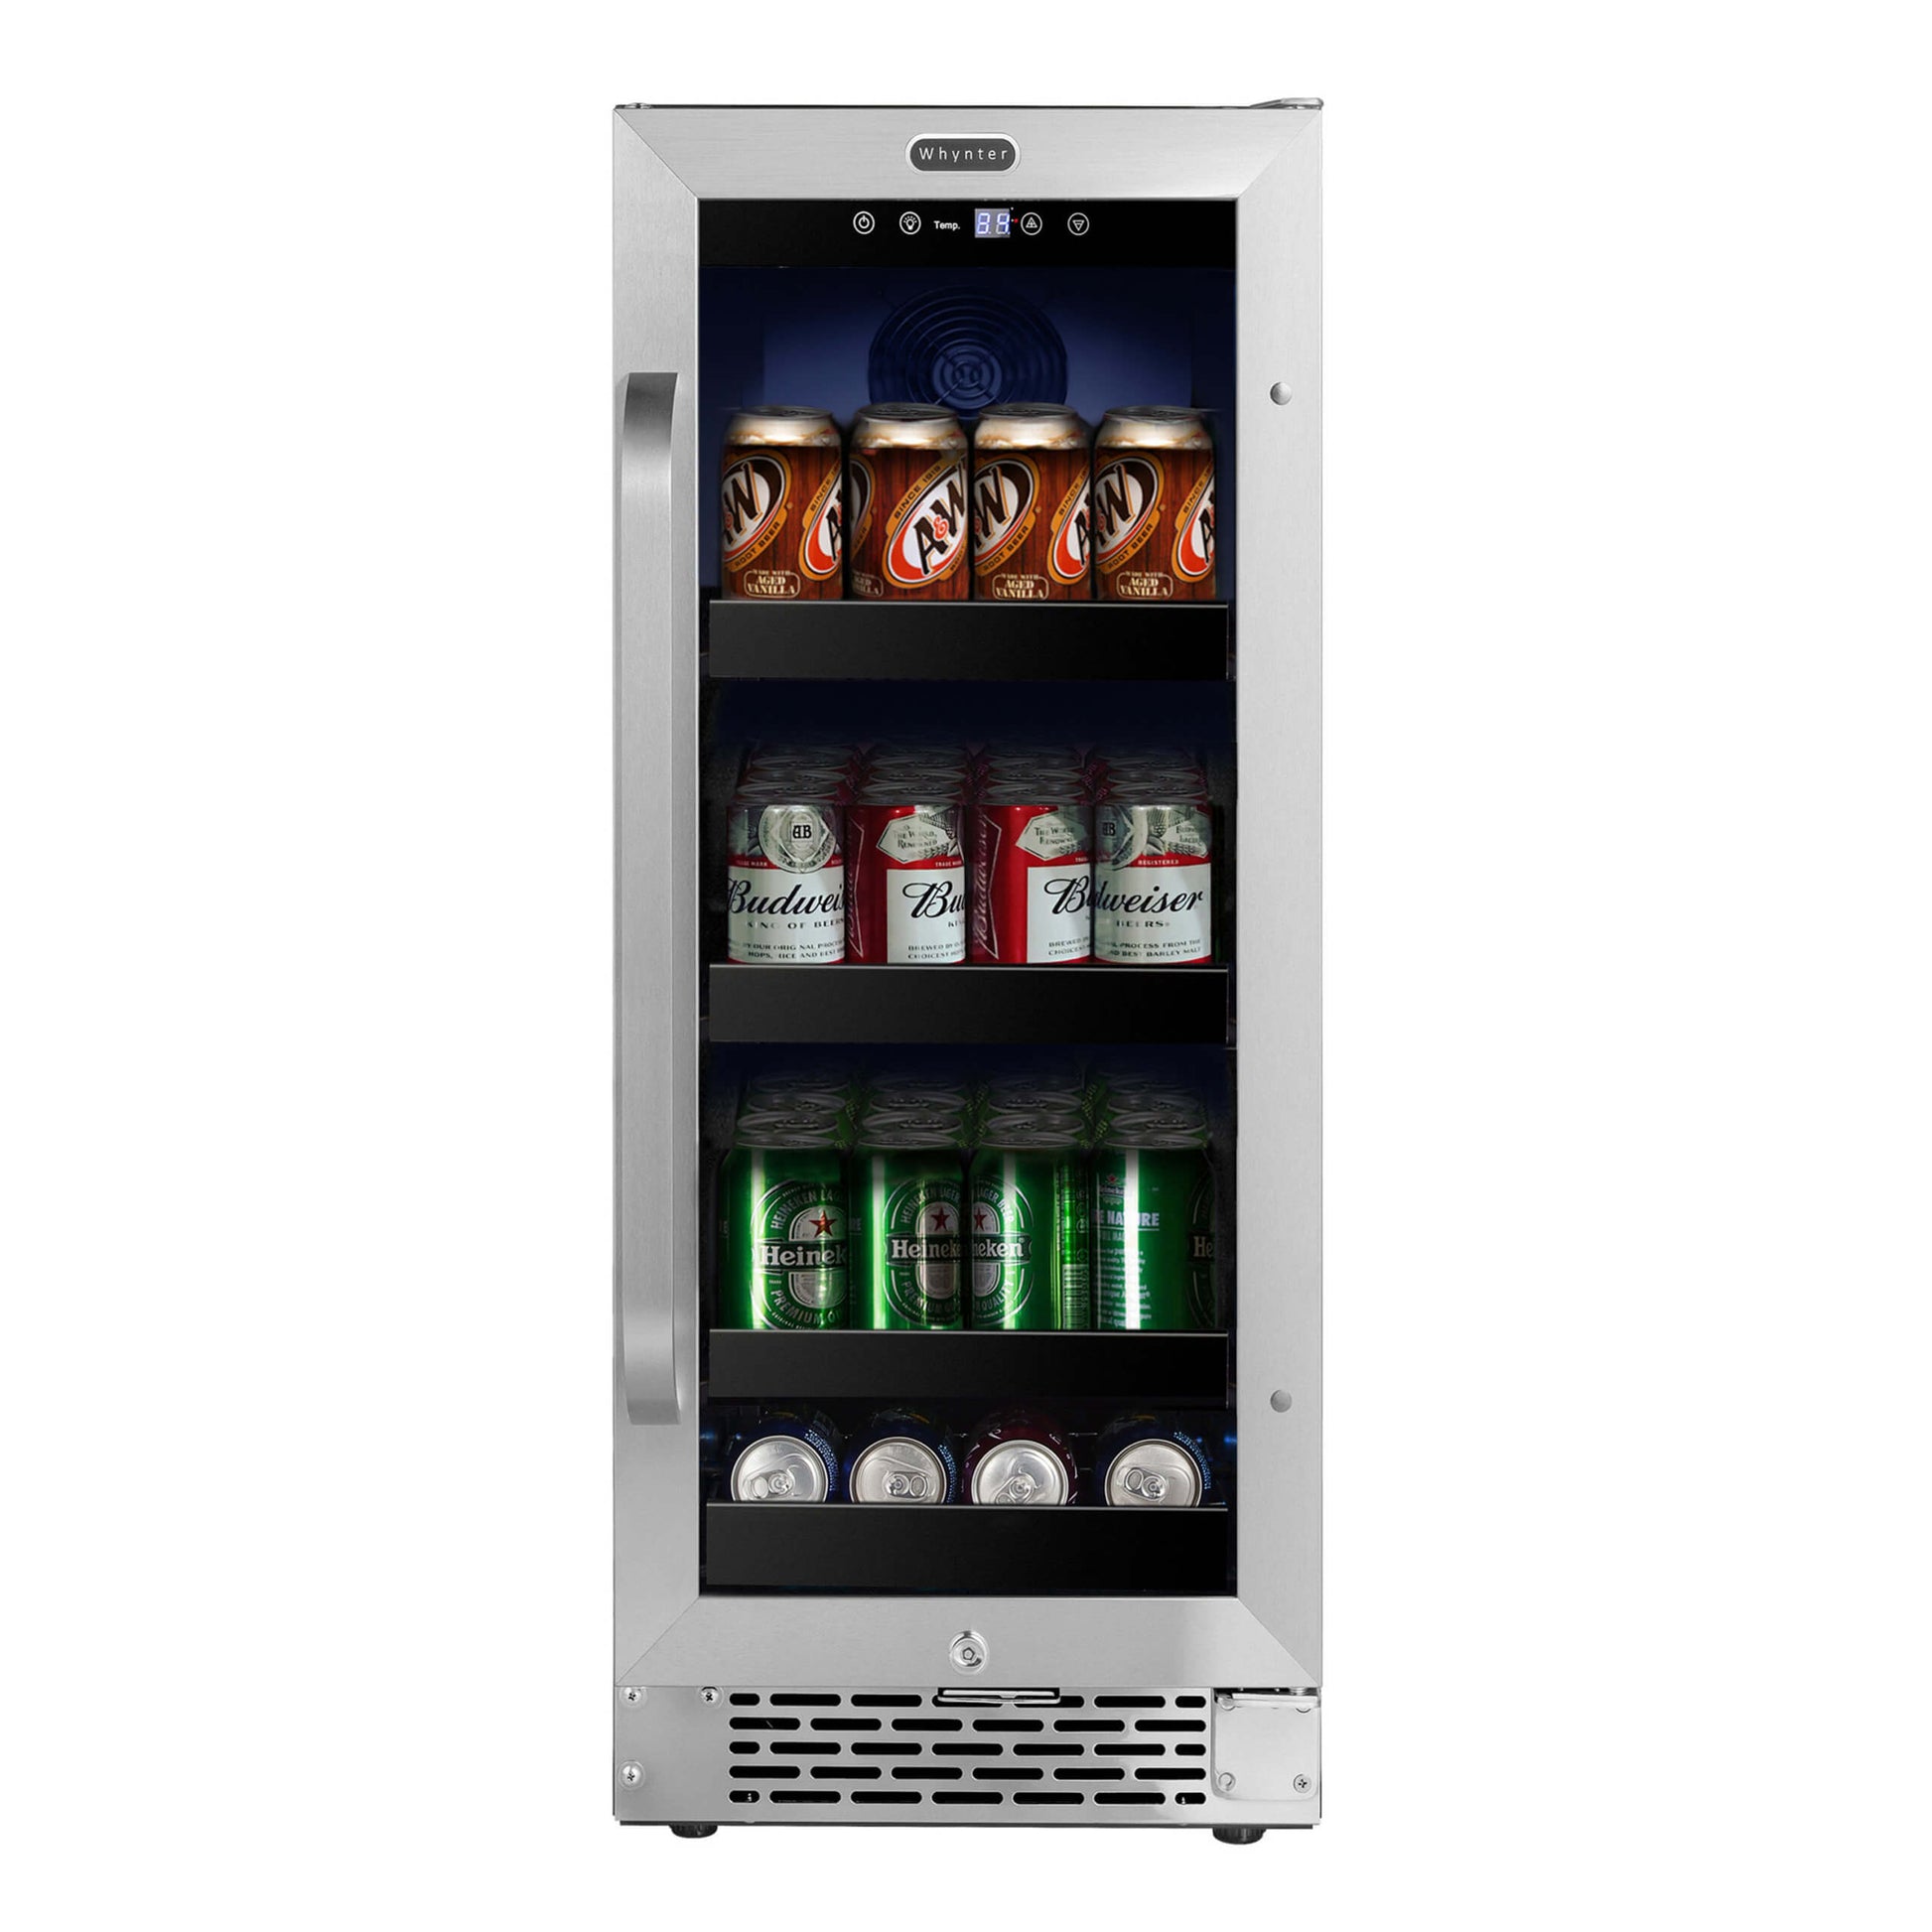 Whynter Beverage Fridge Whynter BBR-838SB 15 inch Built-In 80 Can Undercounter Stainless Steel Beverage Refrigerator with Reversible Door, Digital Control, Lock and Carbon Filter